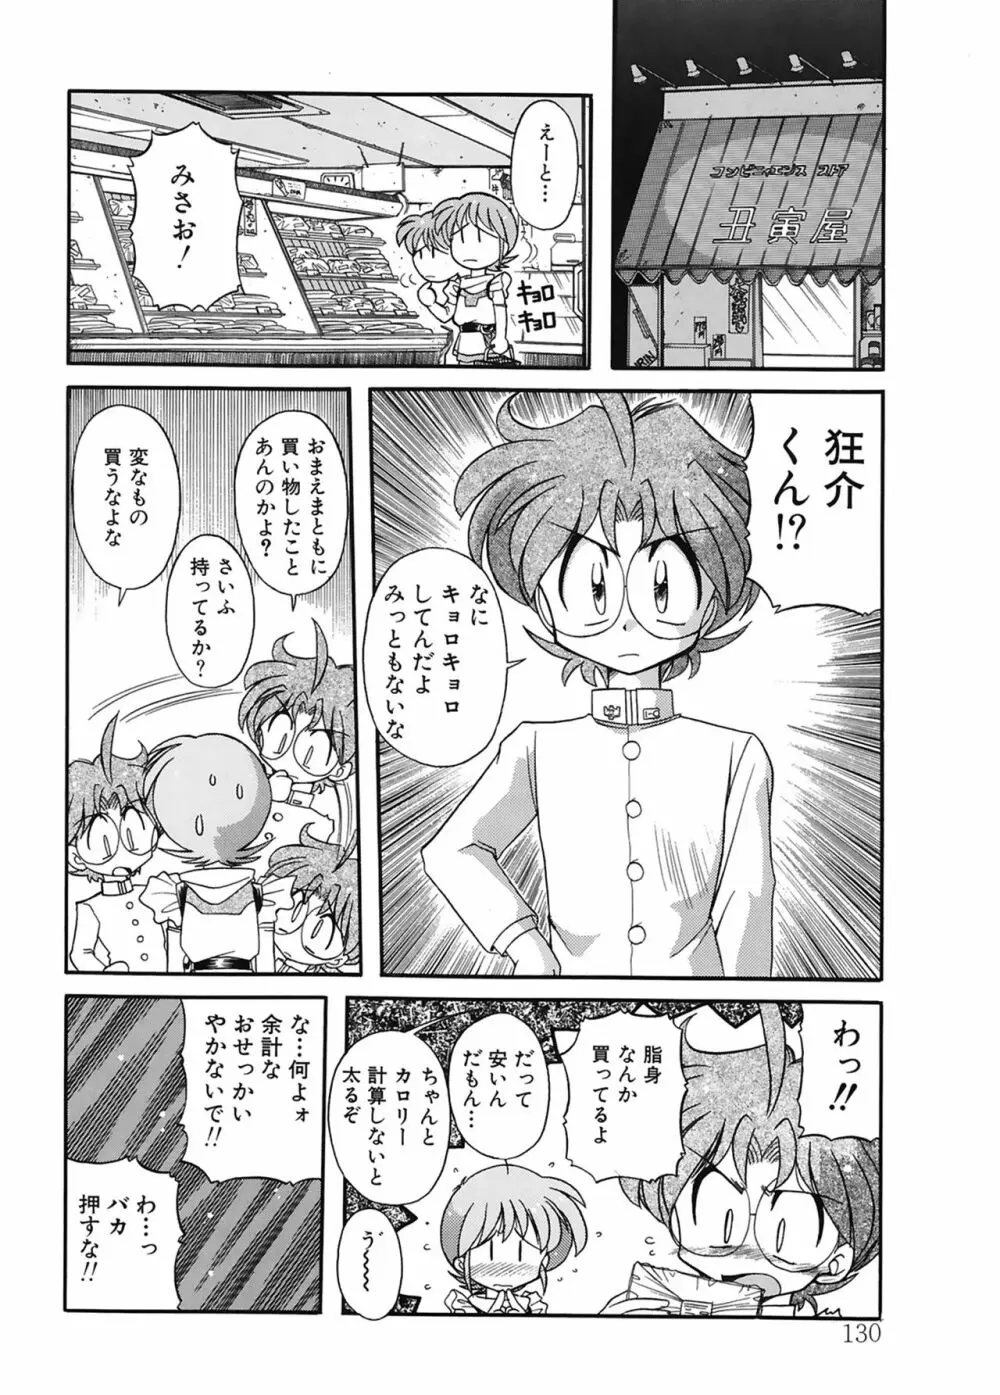 JACK UP featuring徳川玄徳 Page.130